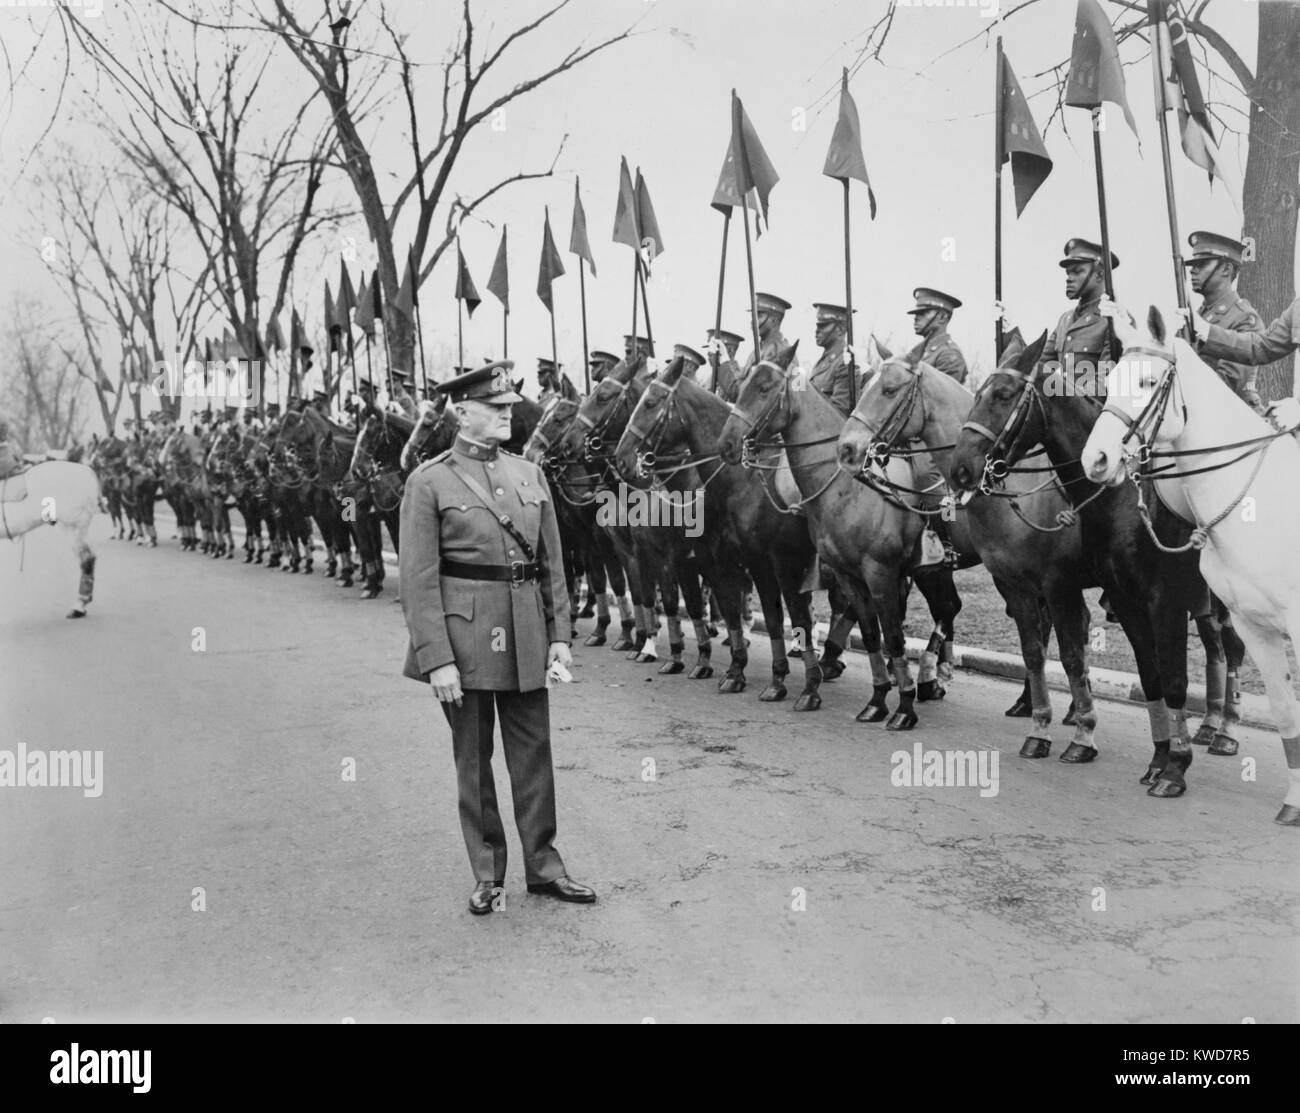 Il generale John Pershing revisione "Buffalo Soldiers' dell'African American decimo cavalleria. Ft. Myer, Virginia, 1932. (BSLOC 2015 16 133) Foto Stock